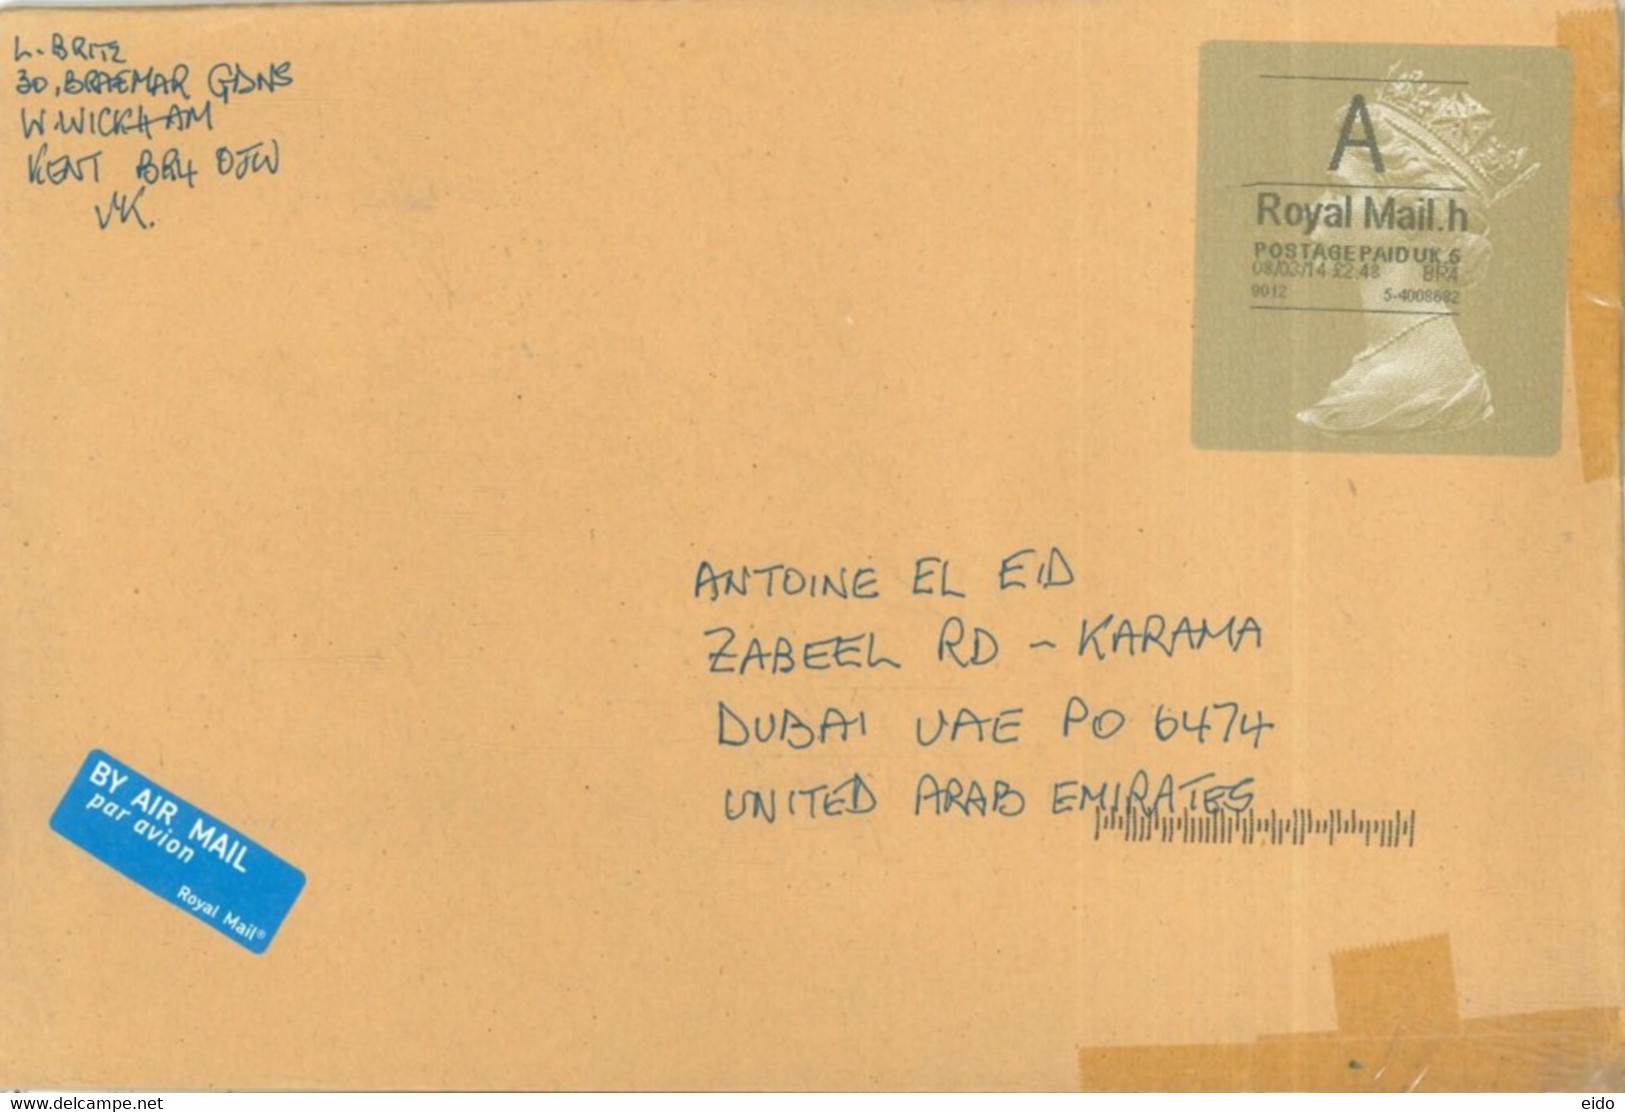 GREAT BRITAIN - 2014 - STAMP LABEL  COVER  TO DUBAI. - Universal Mail Stamps